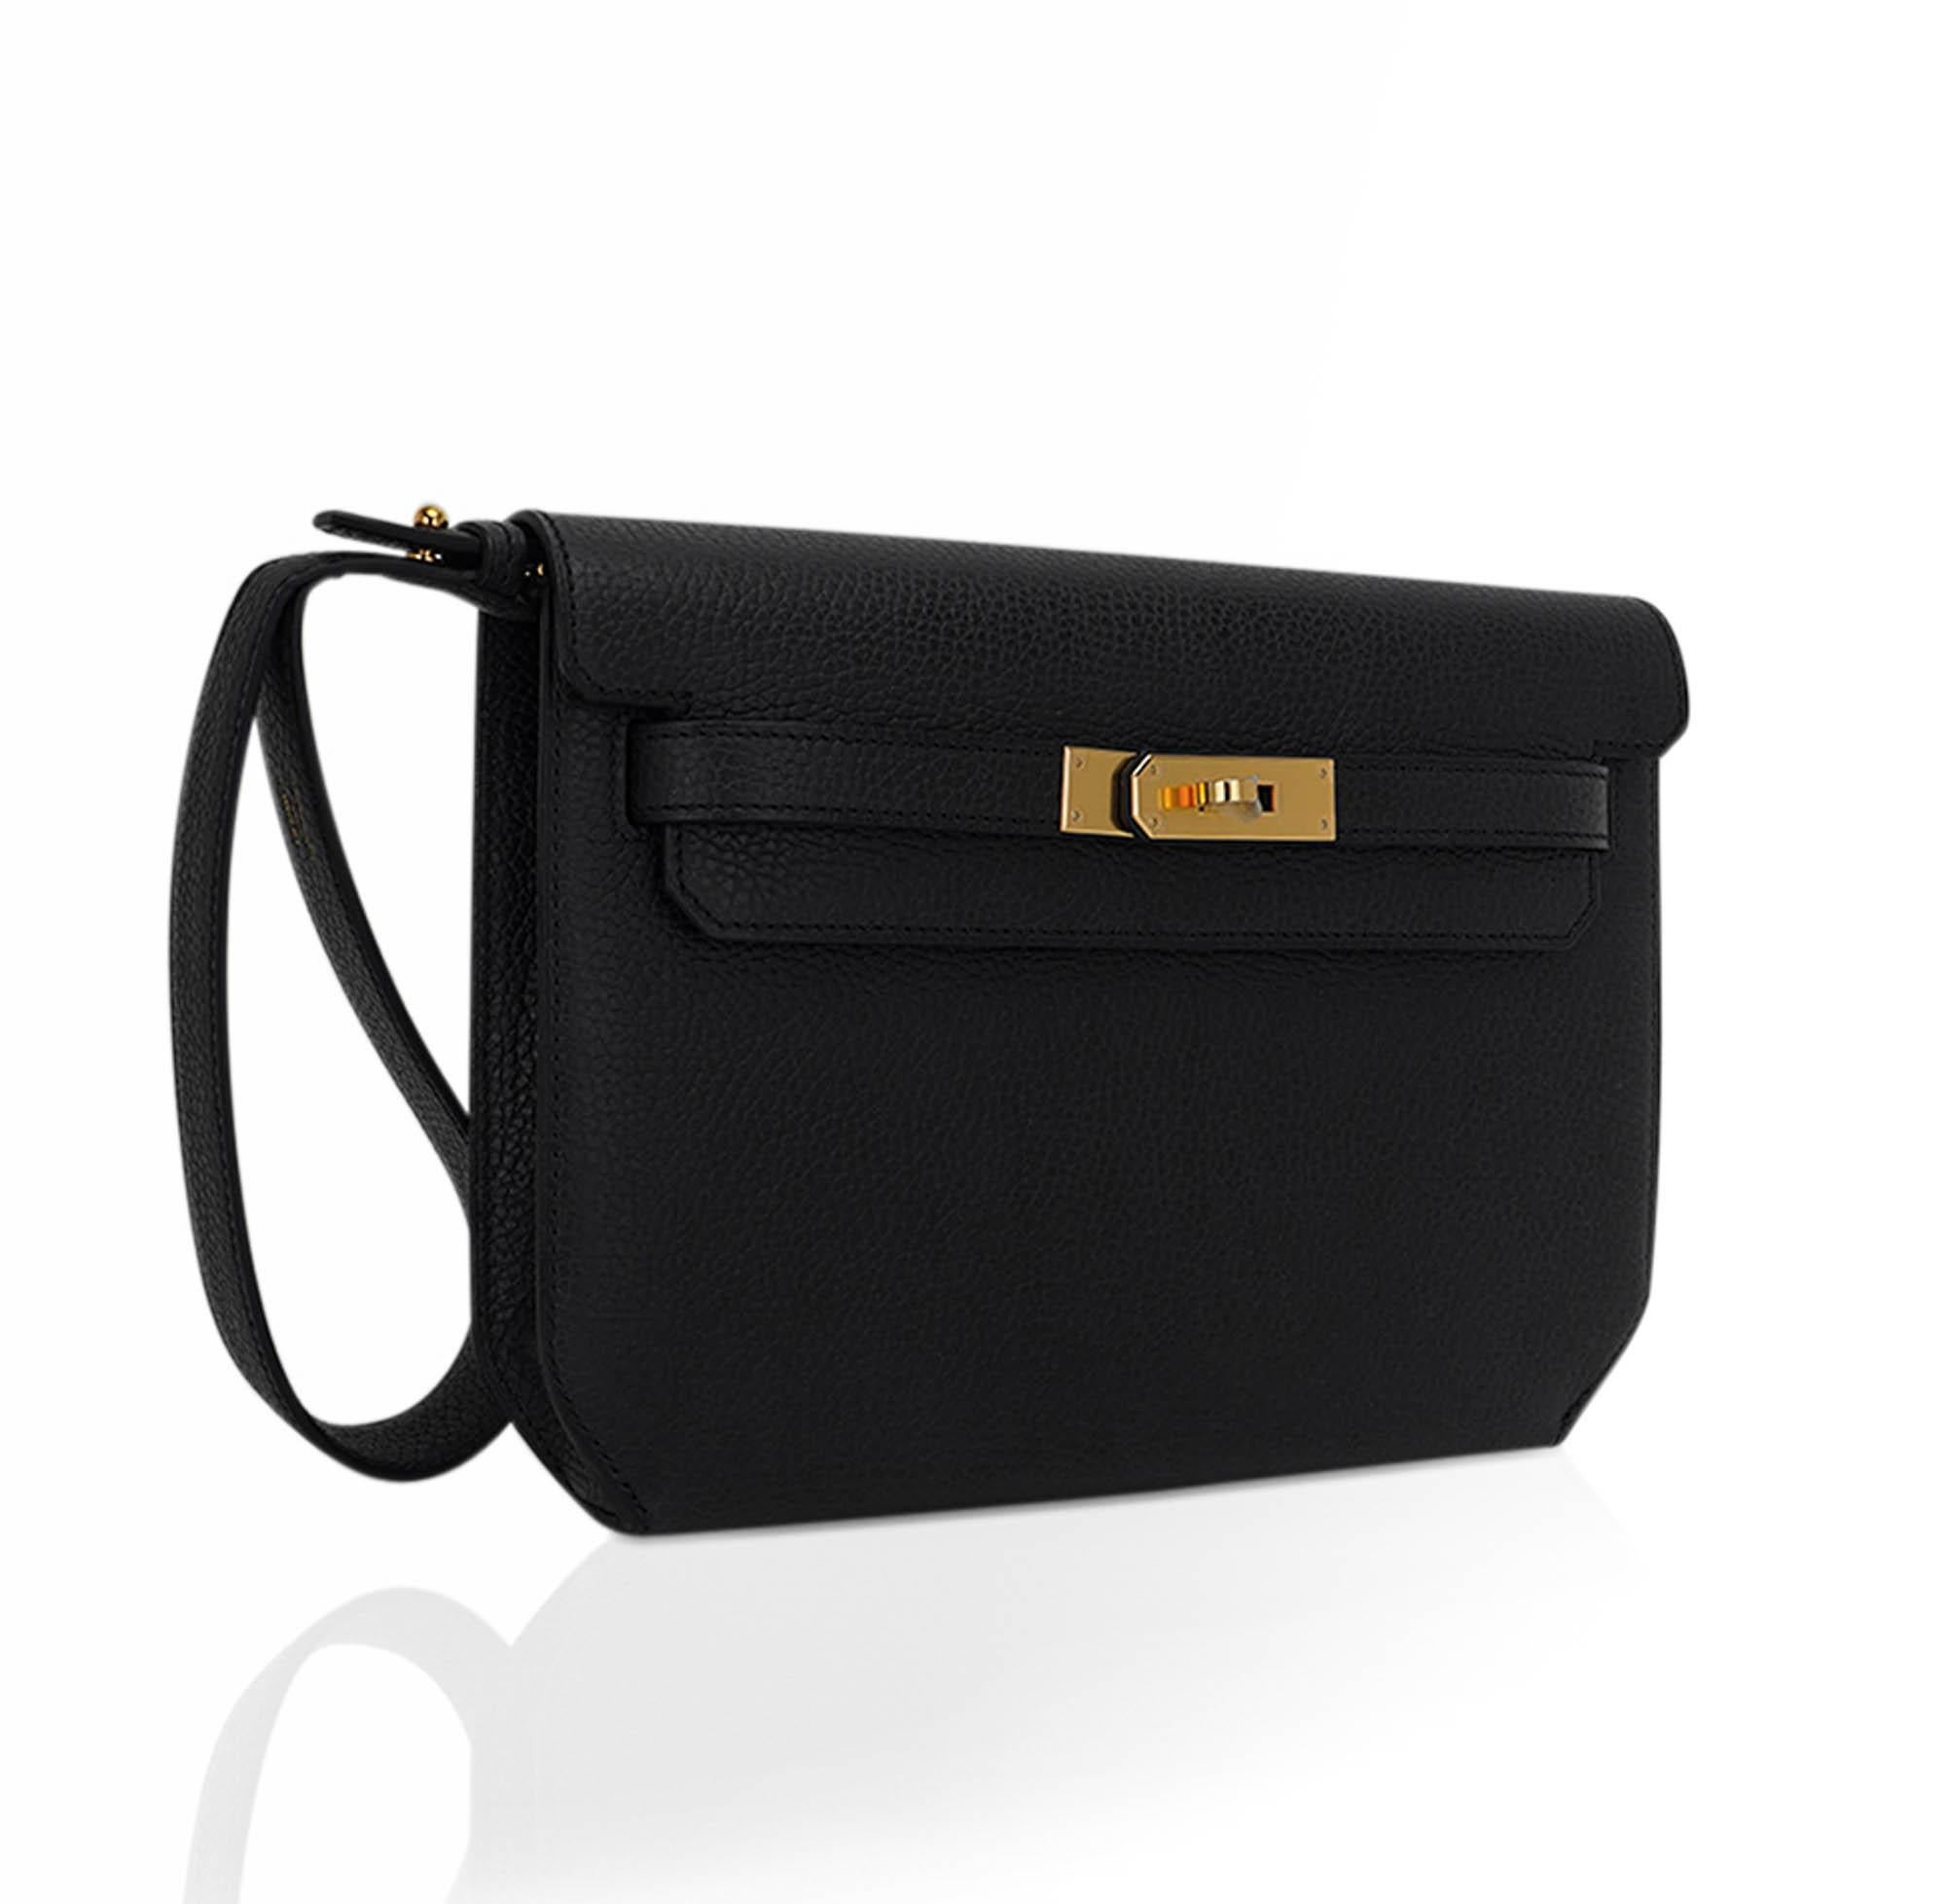 Mightychic offers an Hermes Kelly Depeches 25 Pouch featured in Black very rare Galop D'Hermes Vache leather.
Timeless with a flat grain, this leather has a rich matte finish.
This exquisite neutral bag is perfect for year round wear.
Accentuated